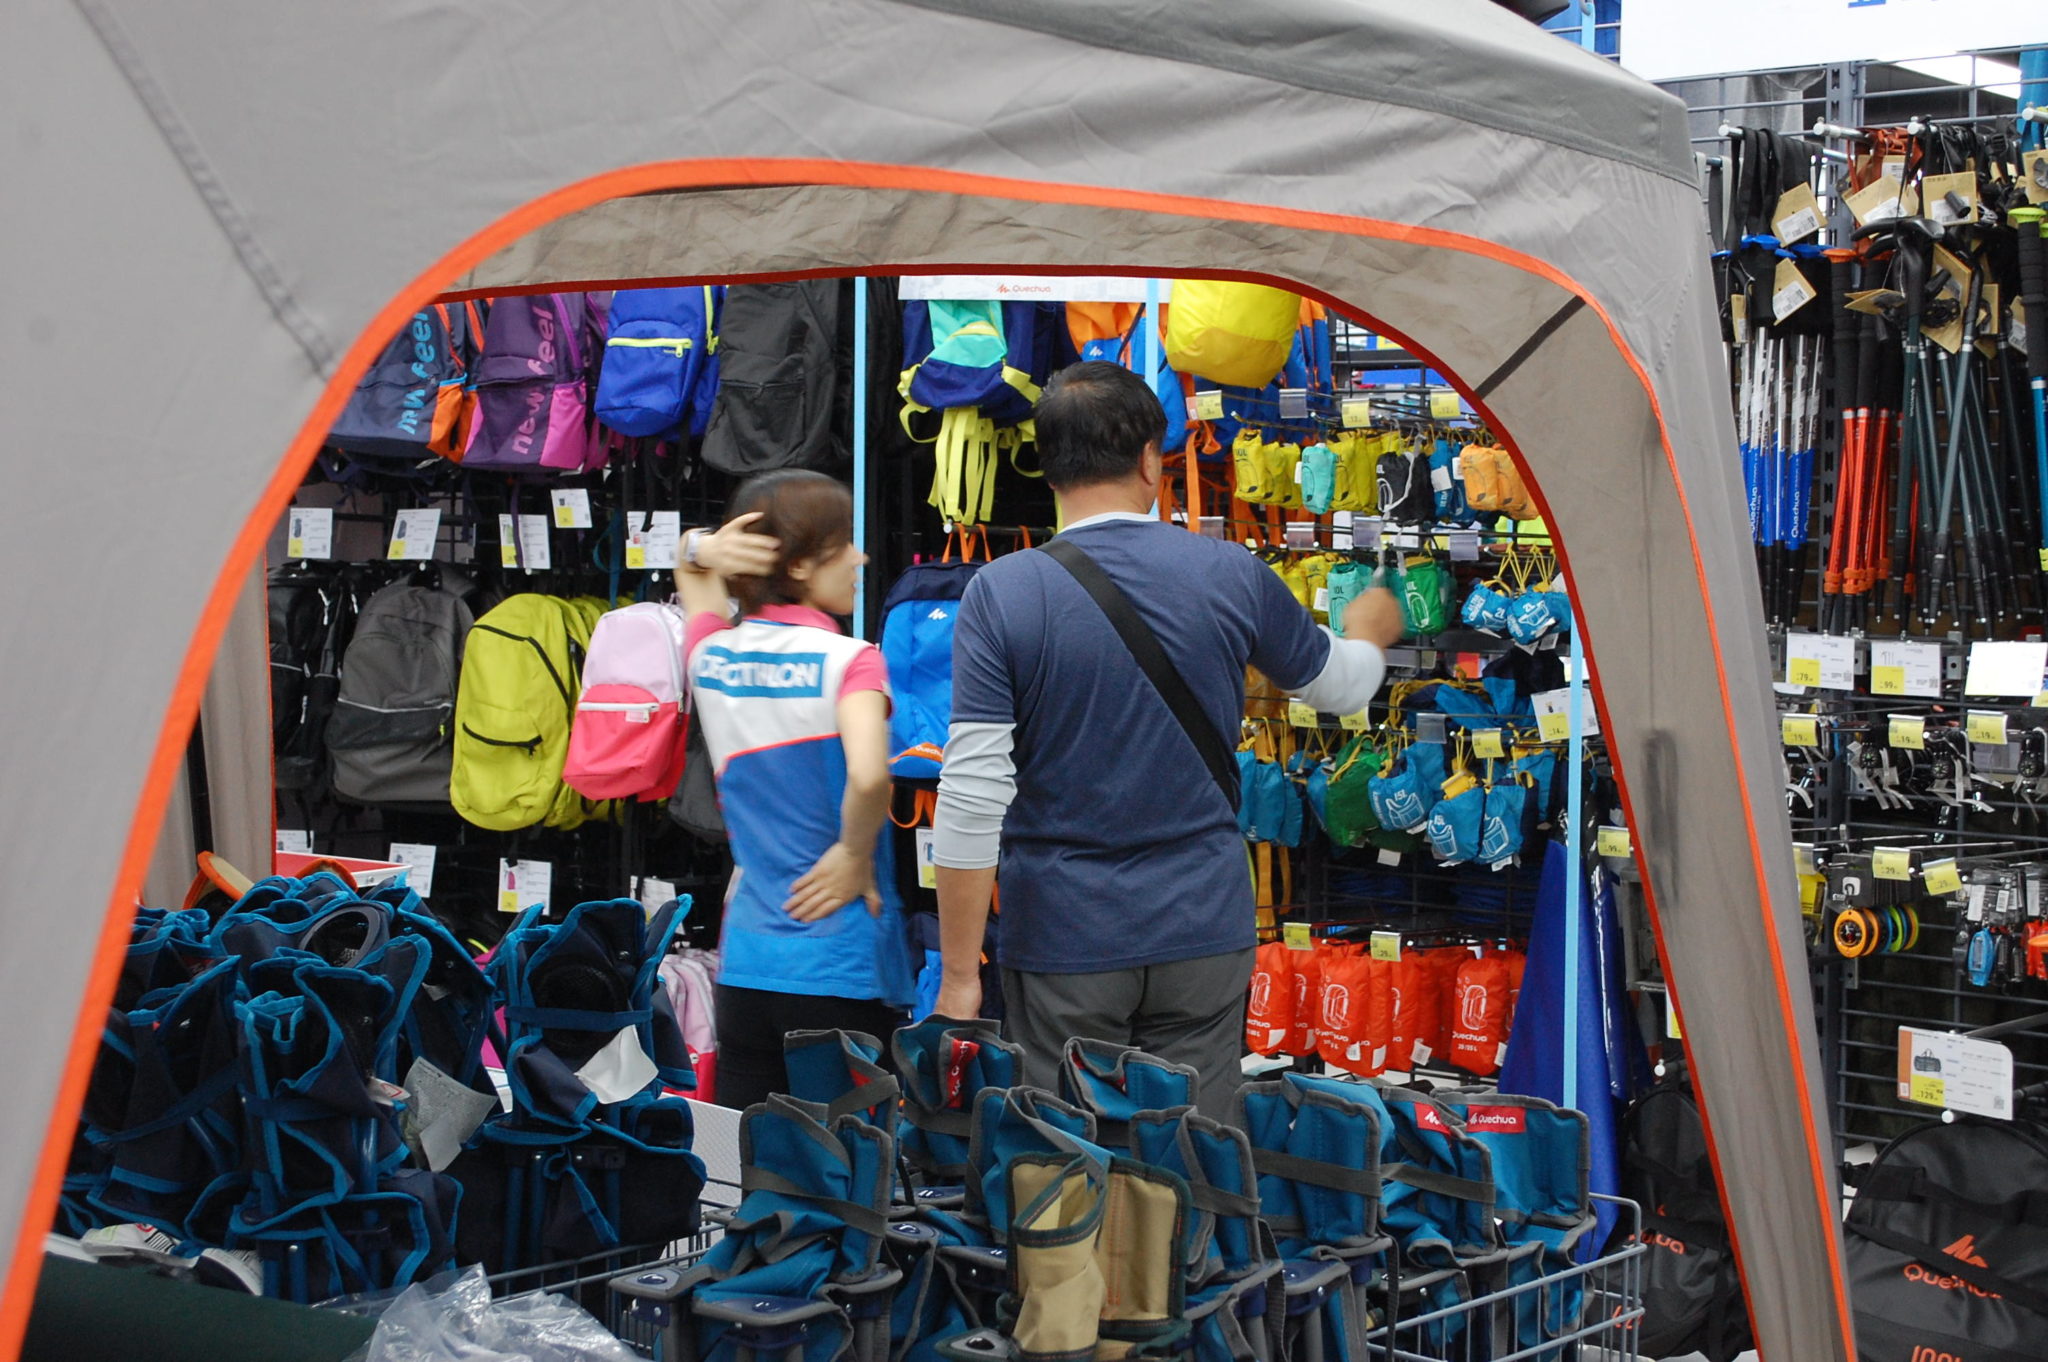 Chinese Outdoor Equipment Market: High Potential with Gradually Increasing Quality of Products